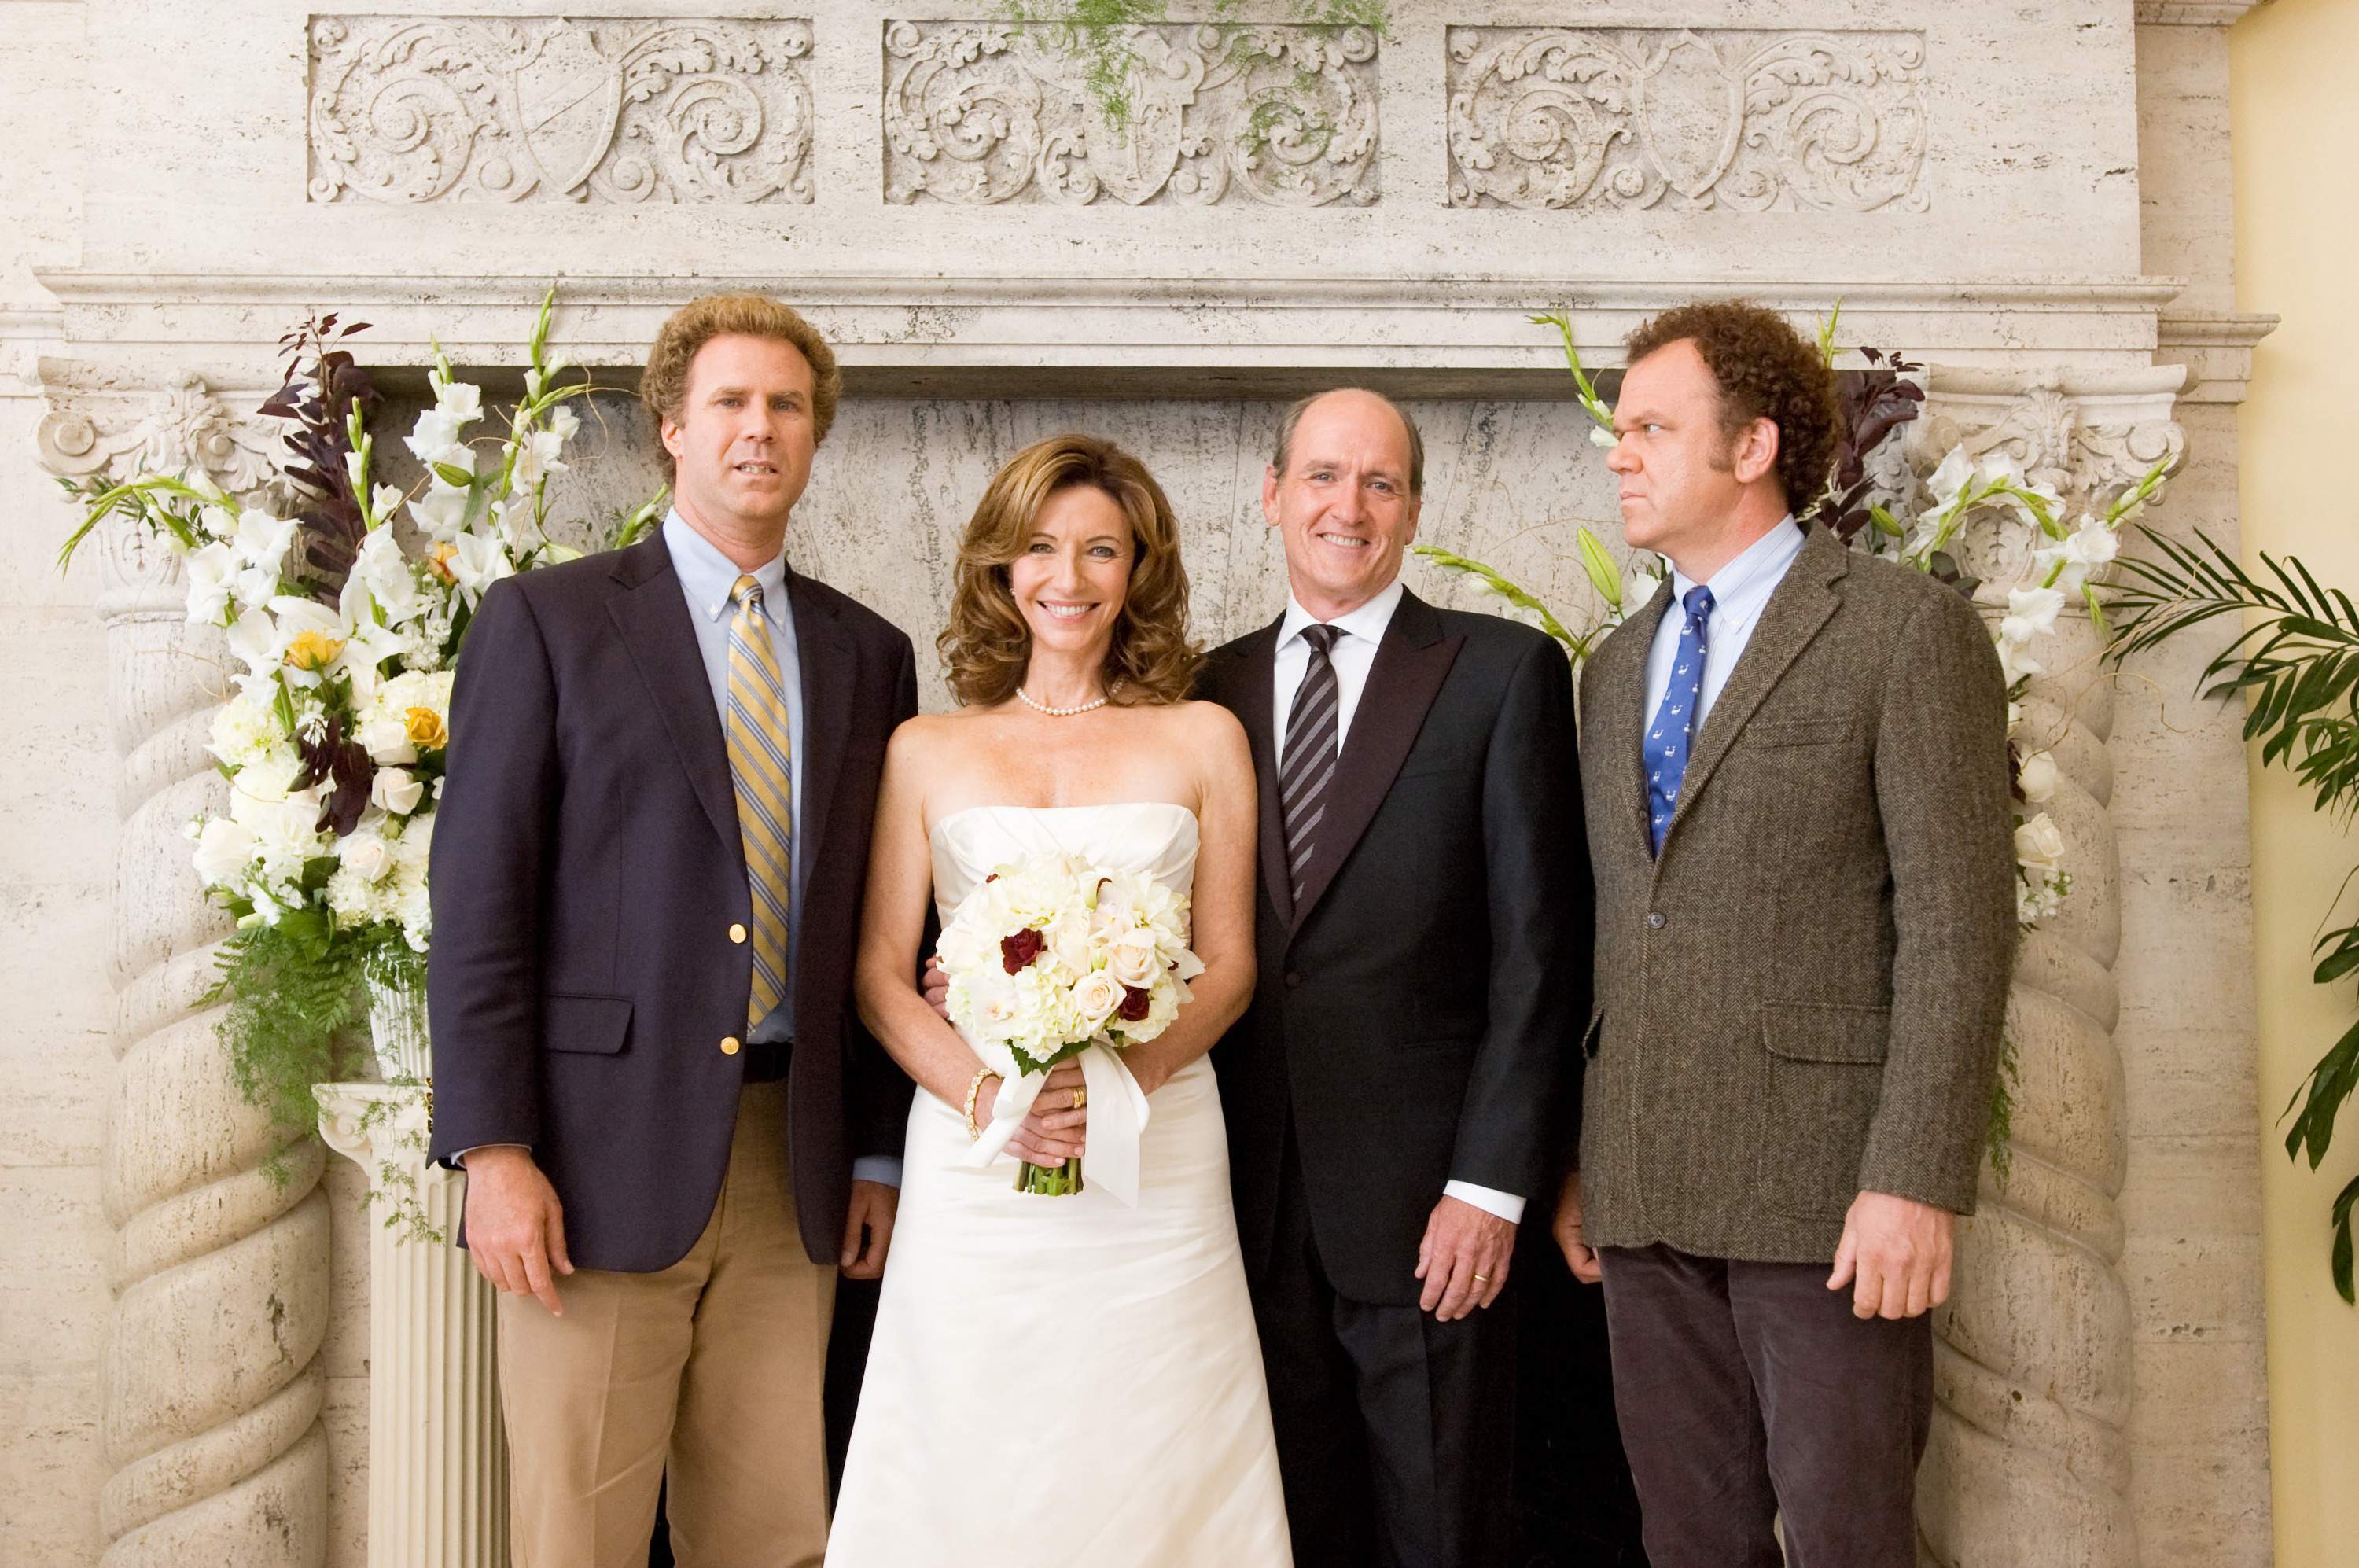 Brennan Huff (Will Ferrell, left) and Dale Doback (John C. Reilly, right) are two middle-aged, immature, overgrown boys forced to live together as stepbrothers when Brennan's mother, Nancy (Mary Steenburgen, center left) marries Dale's father, Robert (Richard Jenkins, center right) in Step Brothers.